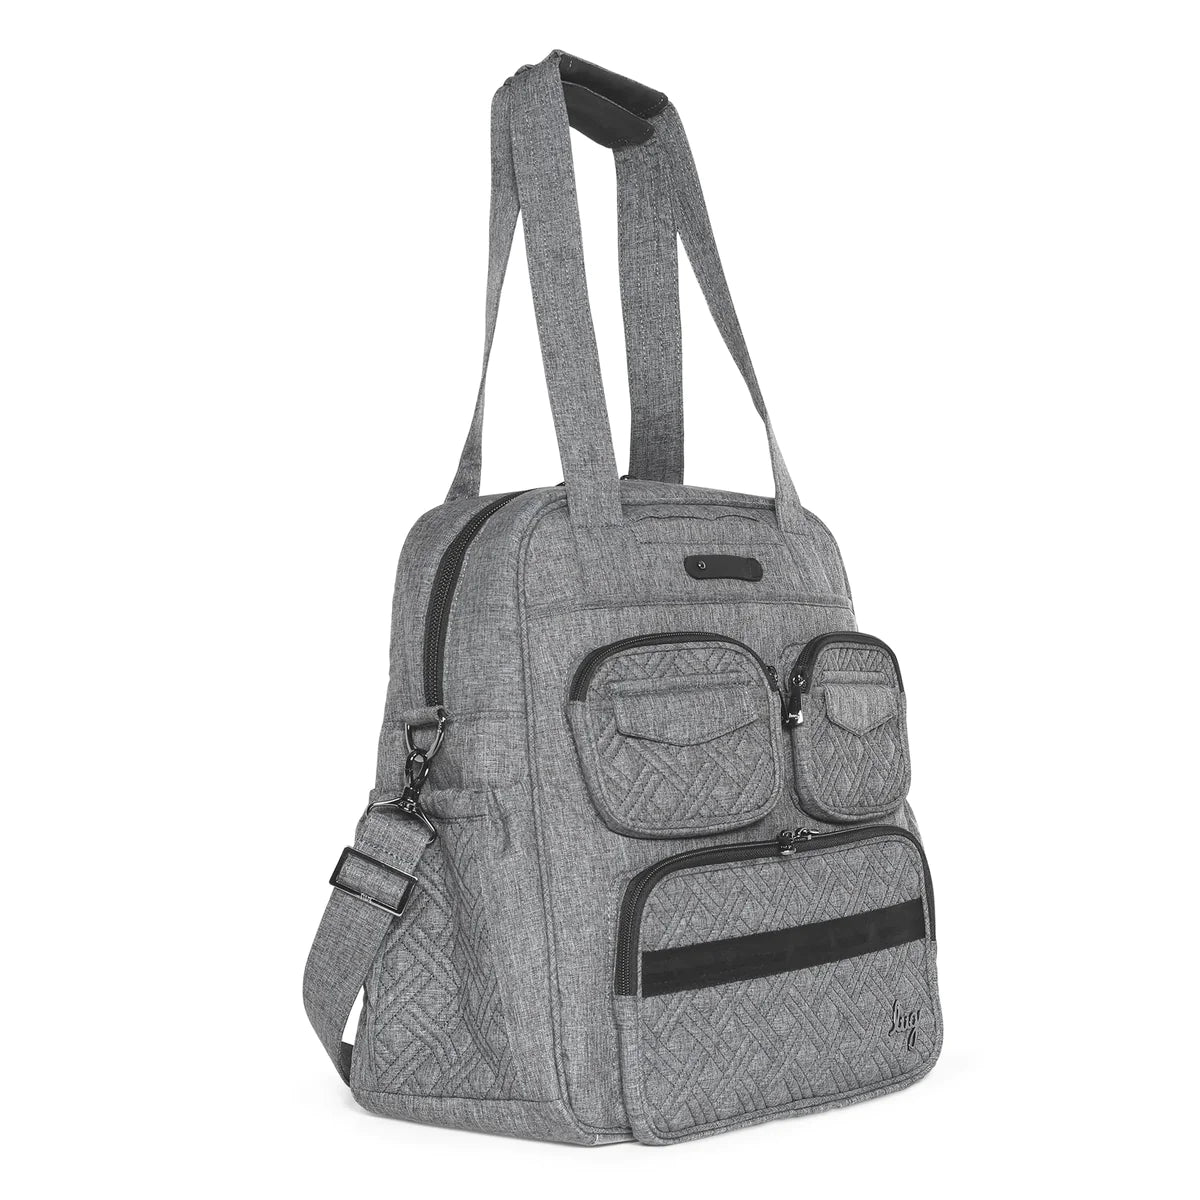 LUG Puddle Jumper LE Convertible Tote Bag in Heather Grey